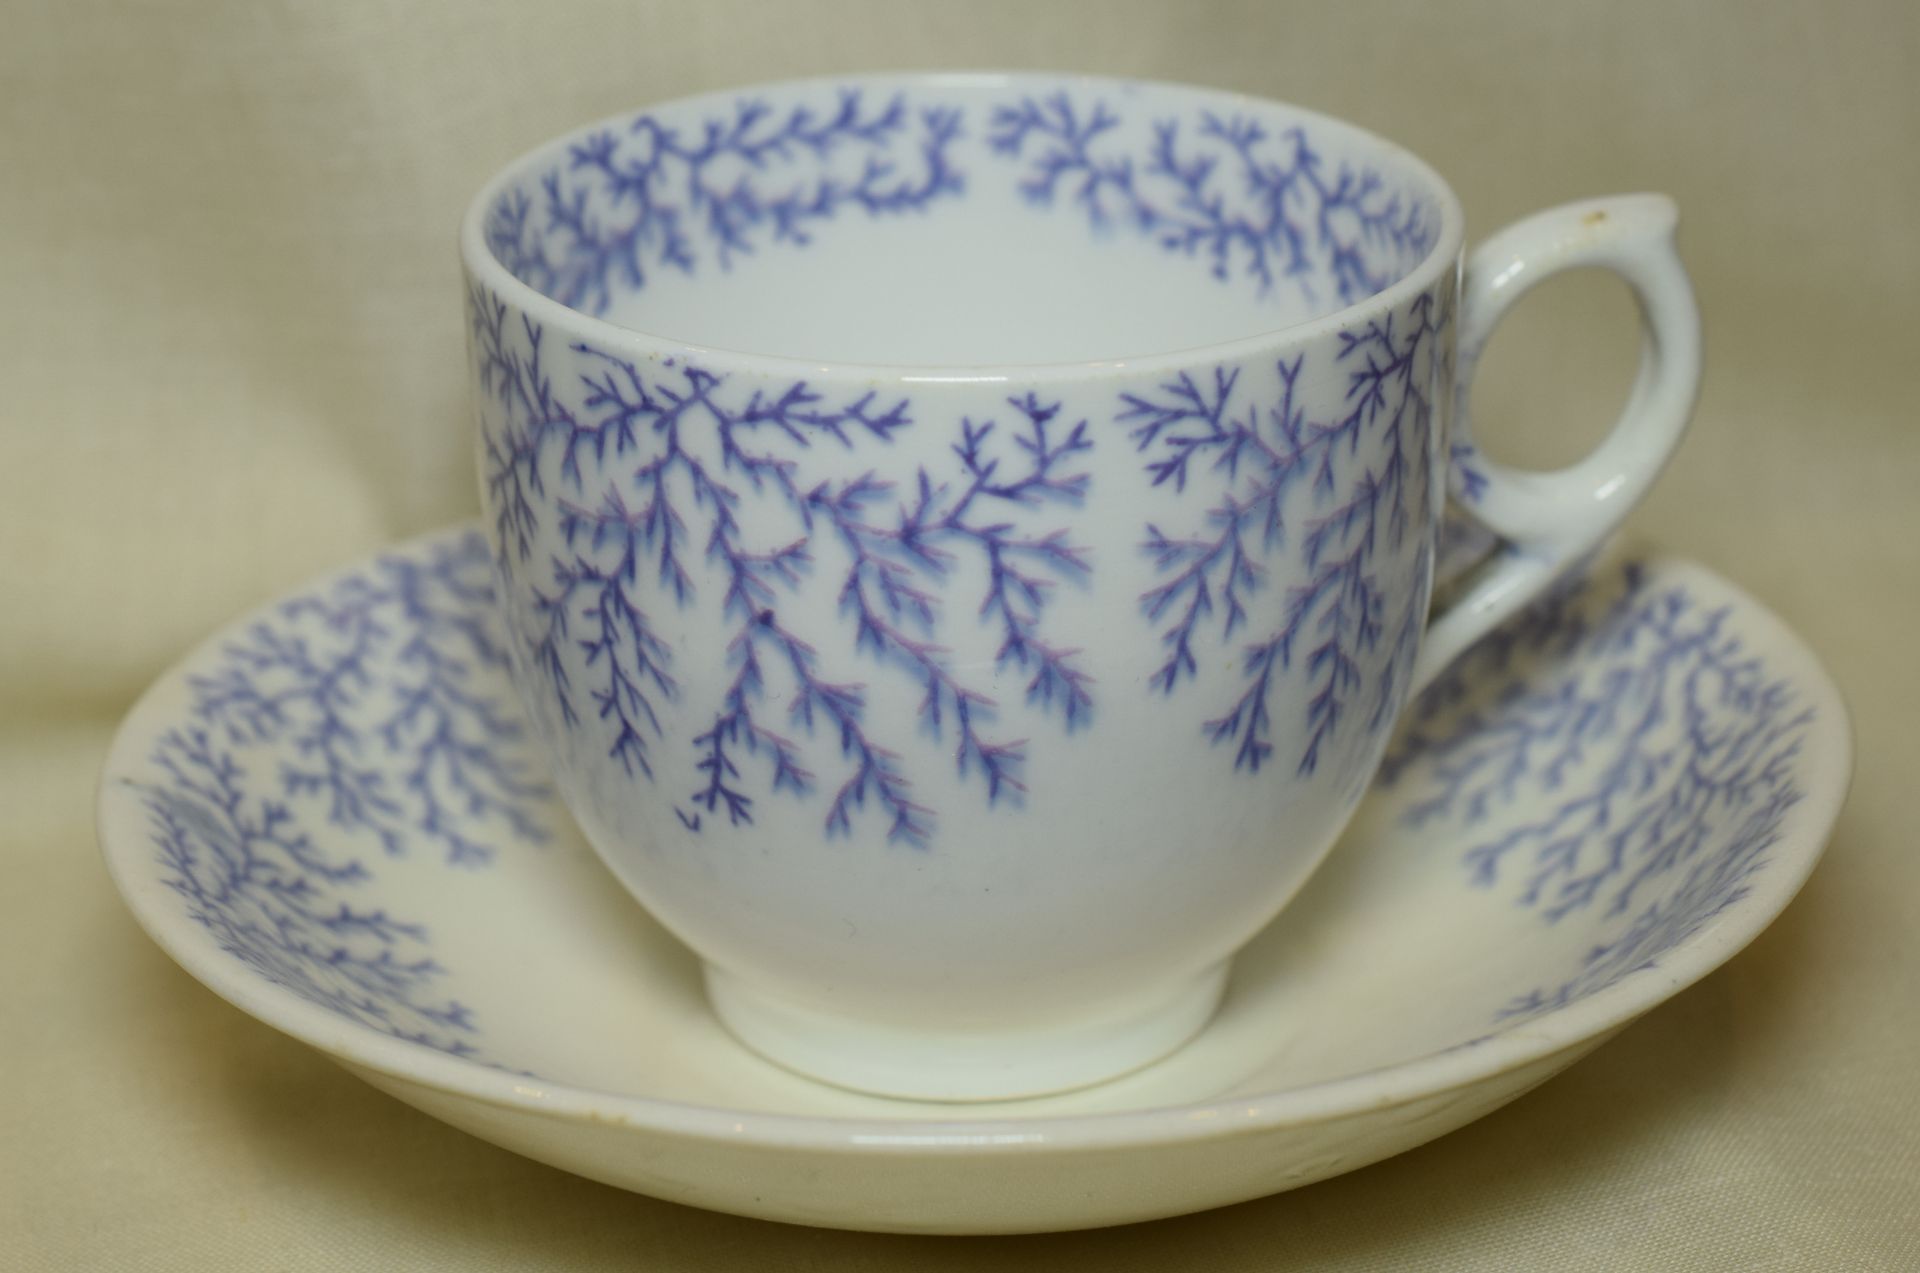 Swansea Blue And White Sprig Design Translucent Cup And Saucer c1850s - Image 2 of 6